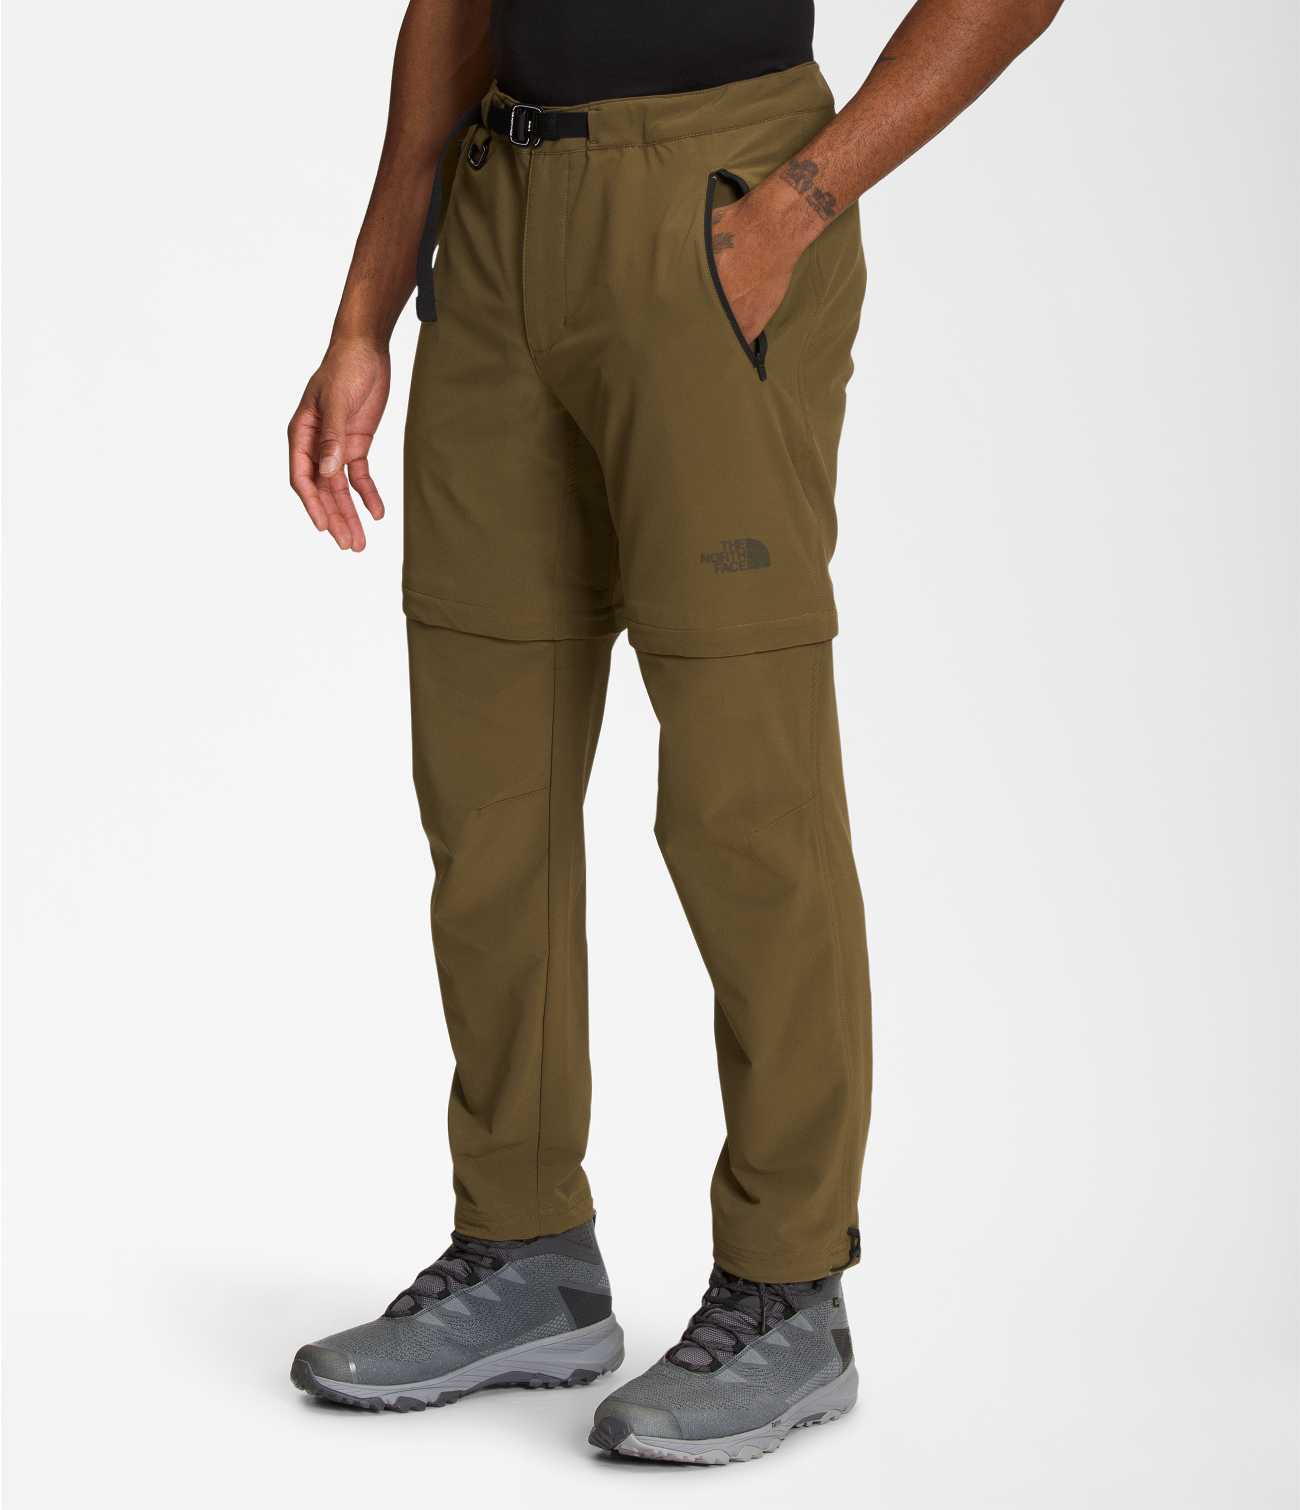 MEN'S PARAMOUNT PRO CONVERTIBLE PANT, The North Face